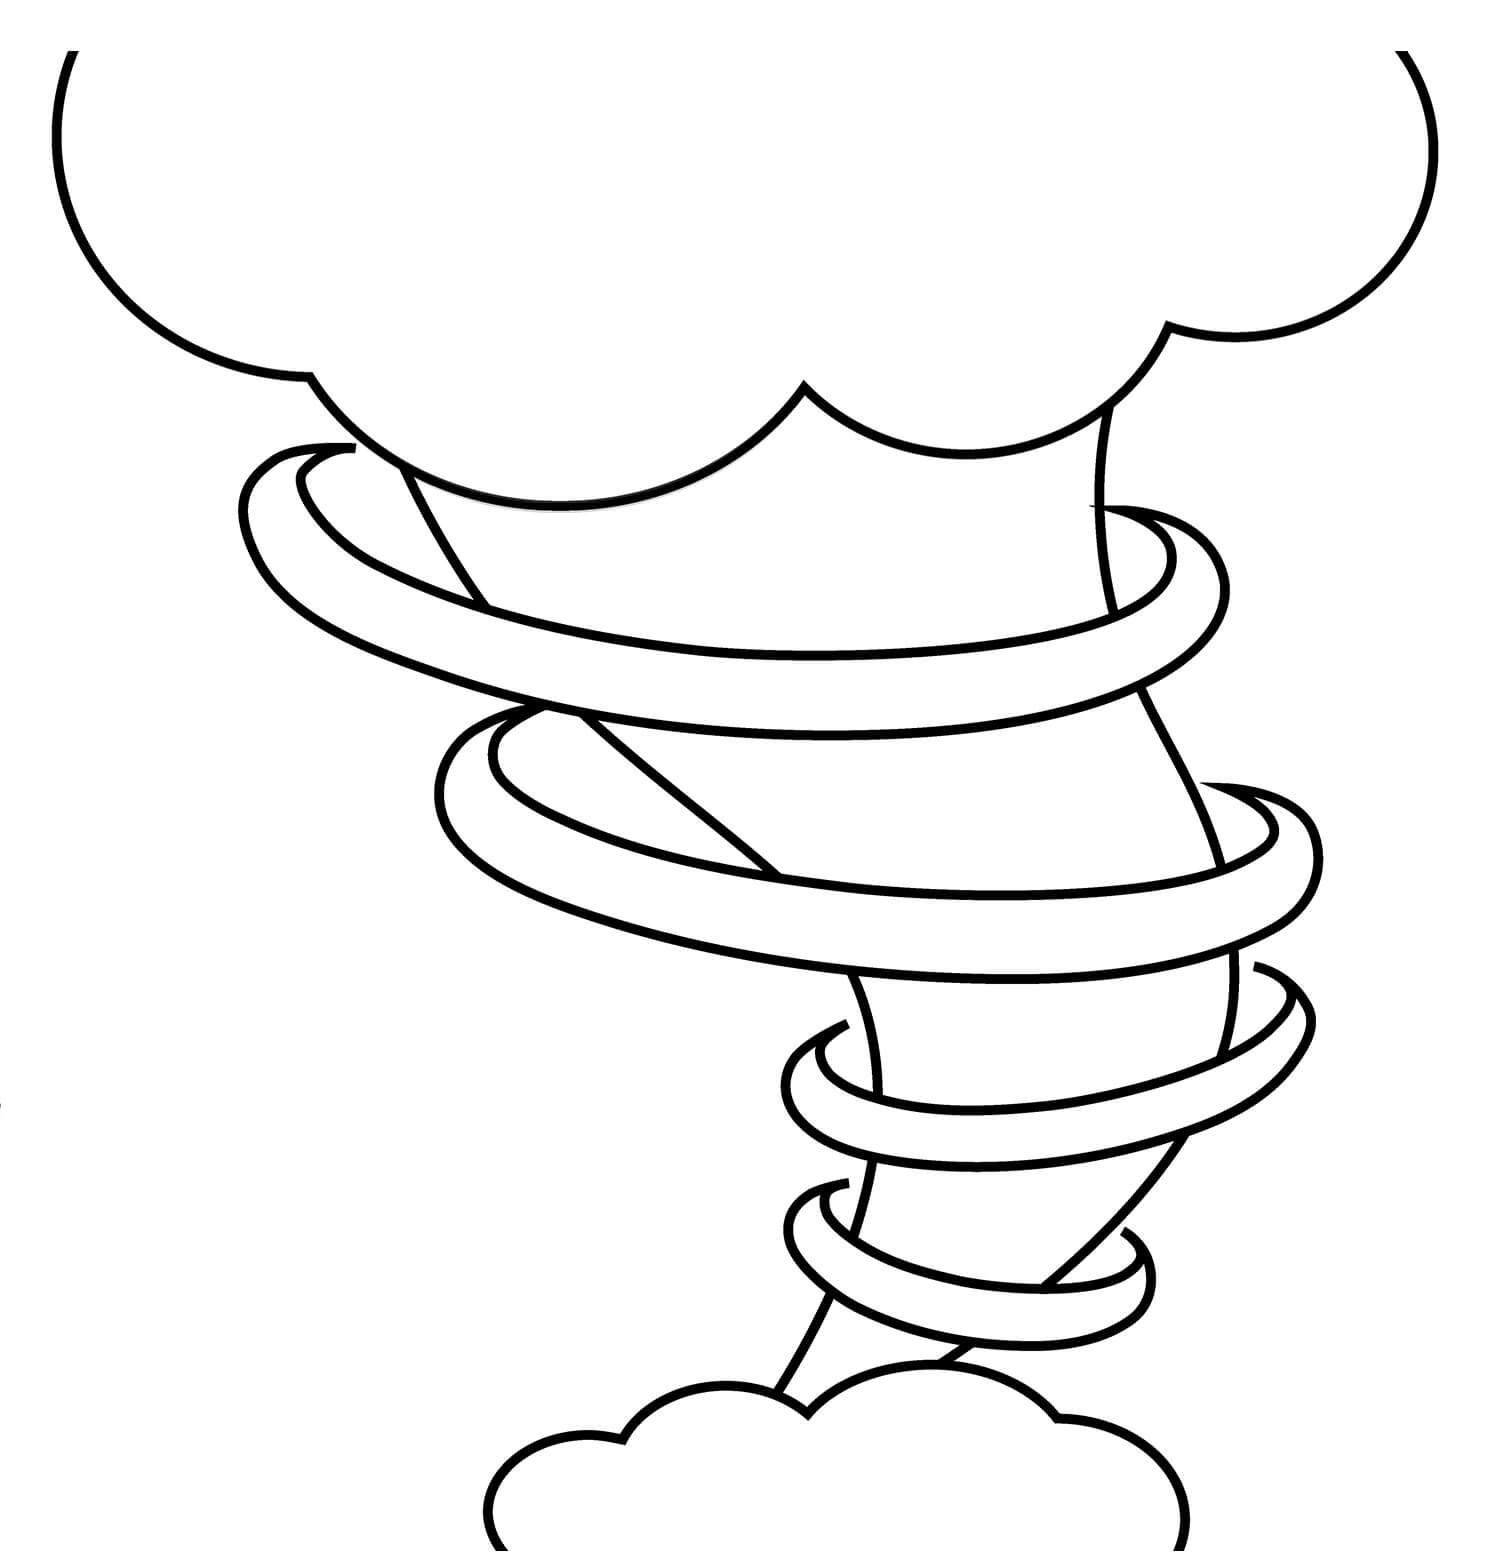 Tornade 9 coloring page